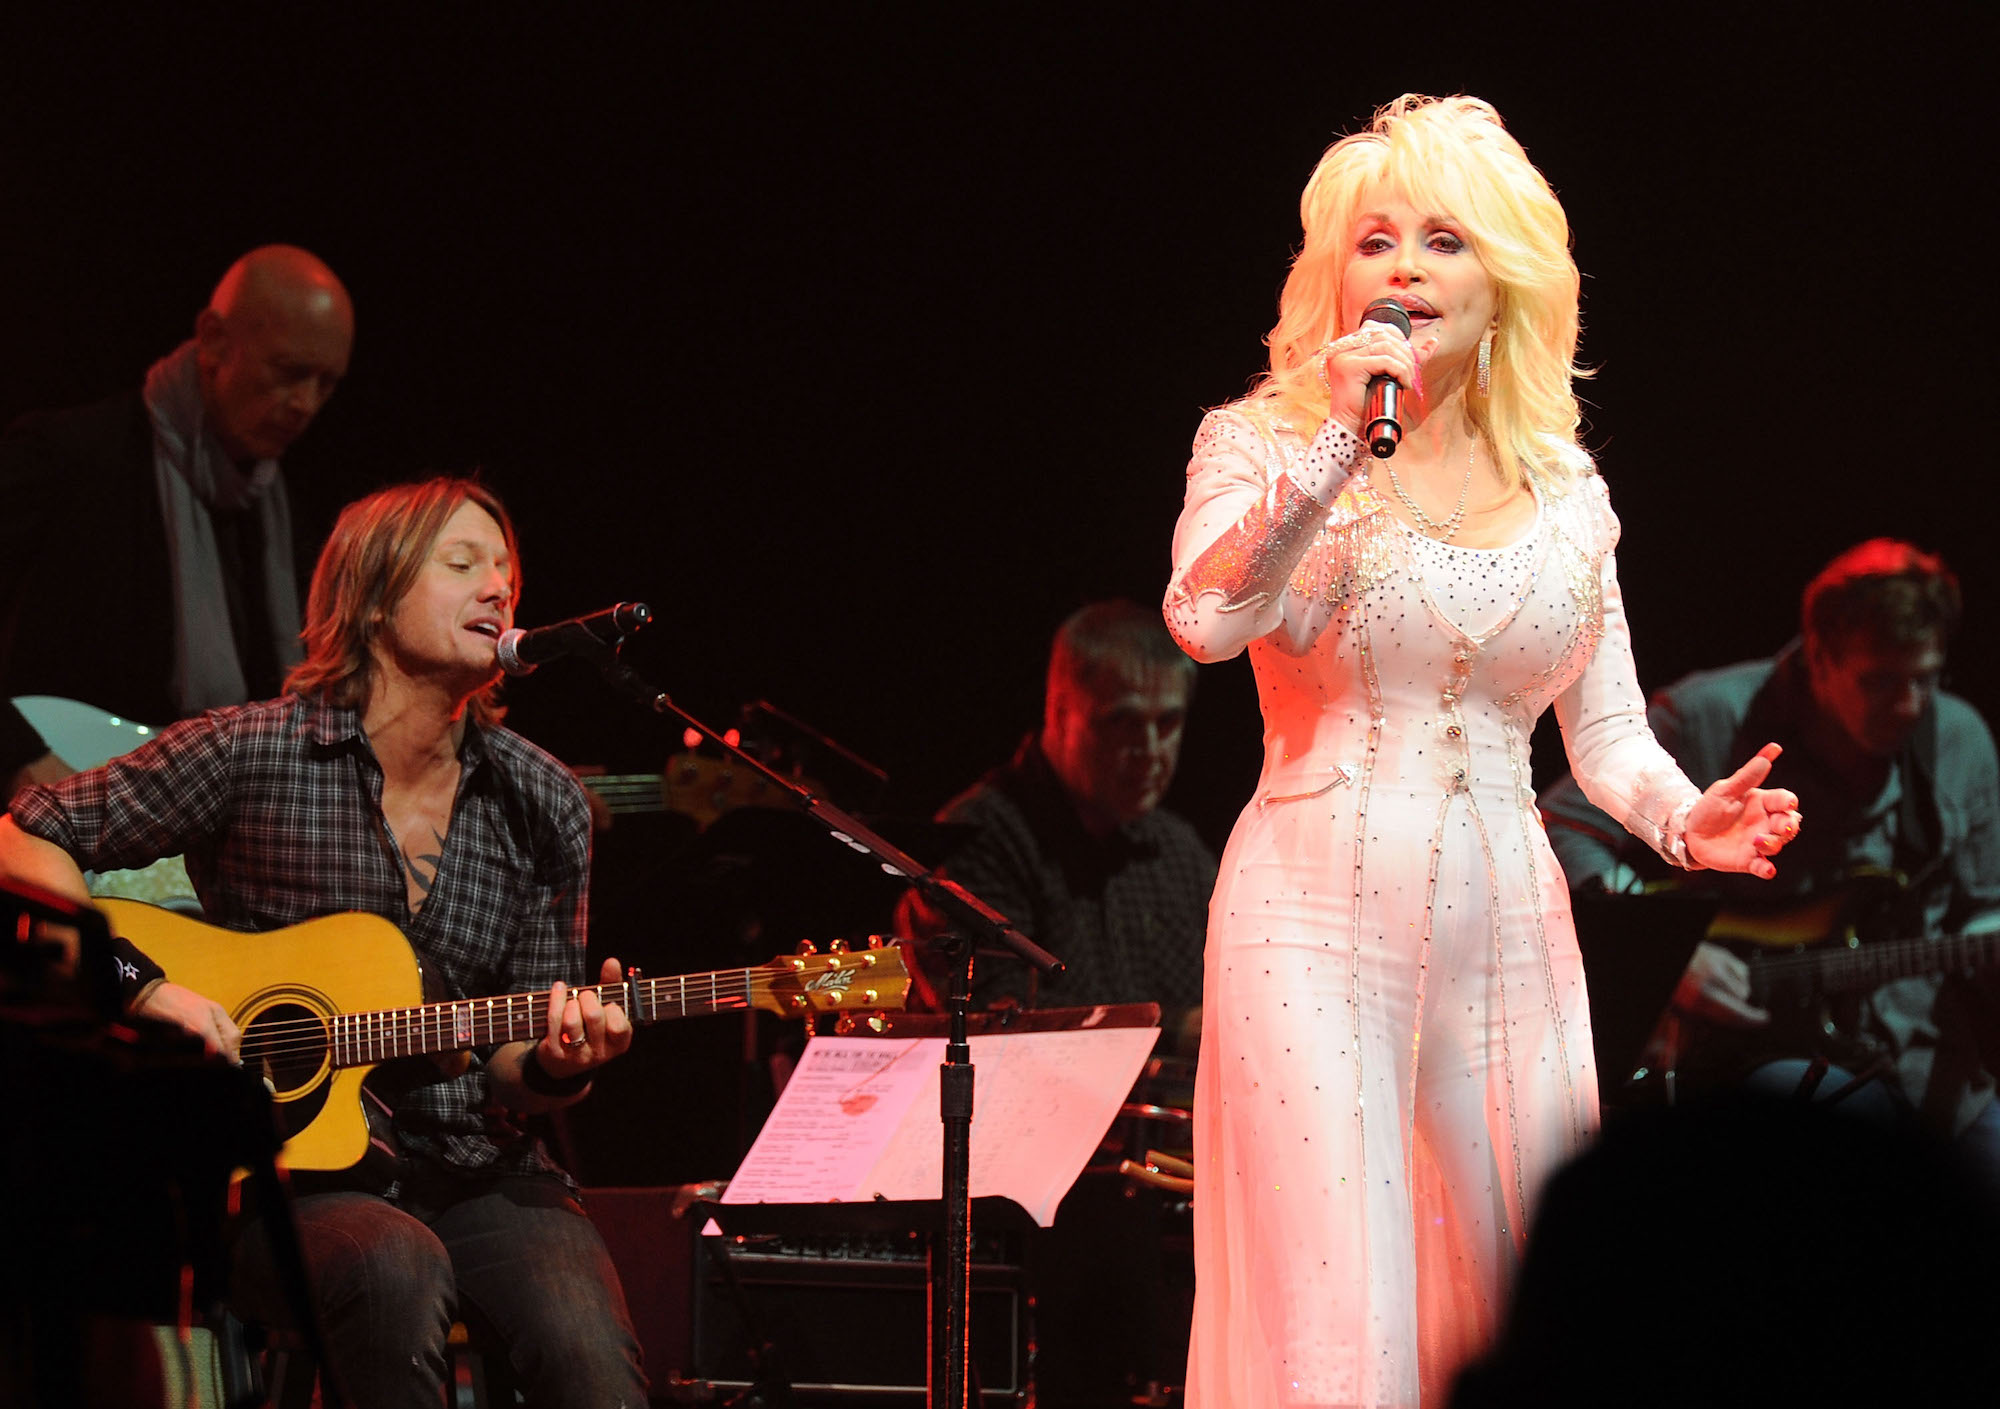 Keith Urban and Dolly Parton performing onstage at the 2010 We're All For The Hall benefit concert